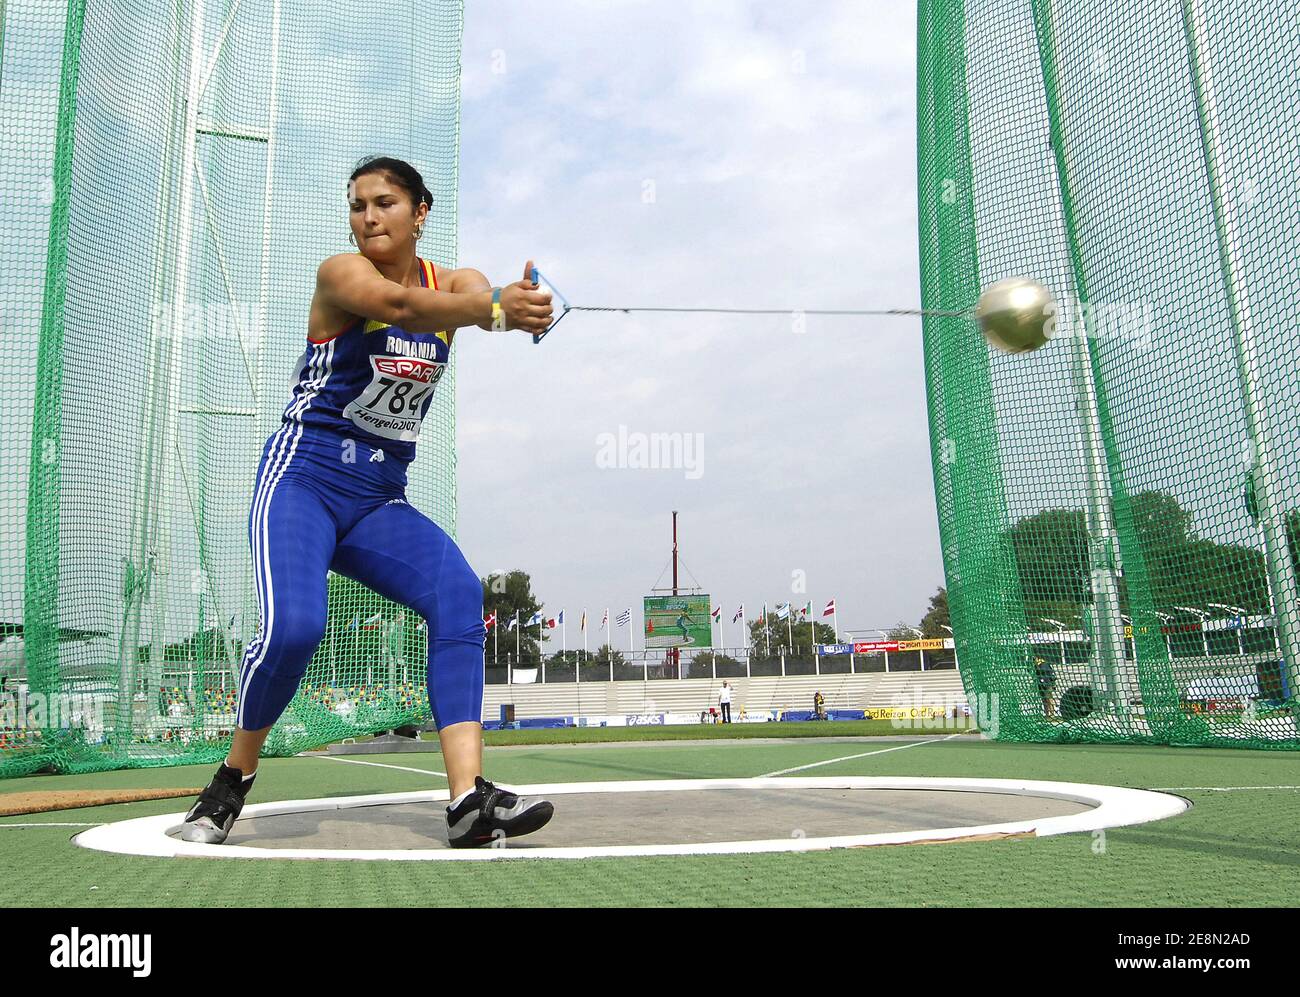 Romania's Bianca Perie performs on women's hammer throw during the European  Athletics Junior Championships, in Hengelo, Netherlands, on July 20, 2007.  Photo by Nicolas Gouhier/Cameleon/ABACAPRESS.COM Stock Photo - Alamy